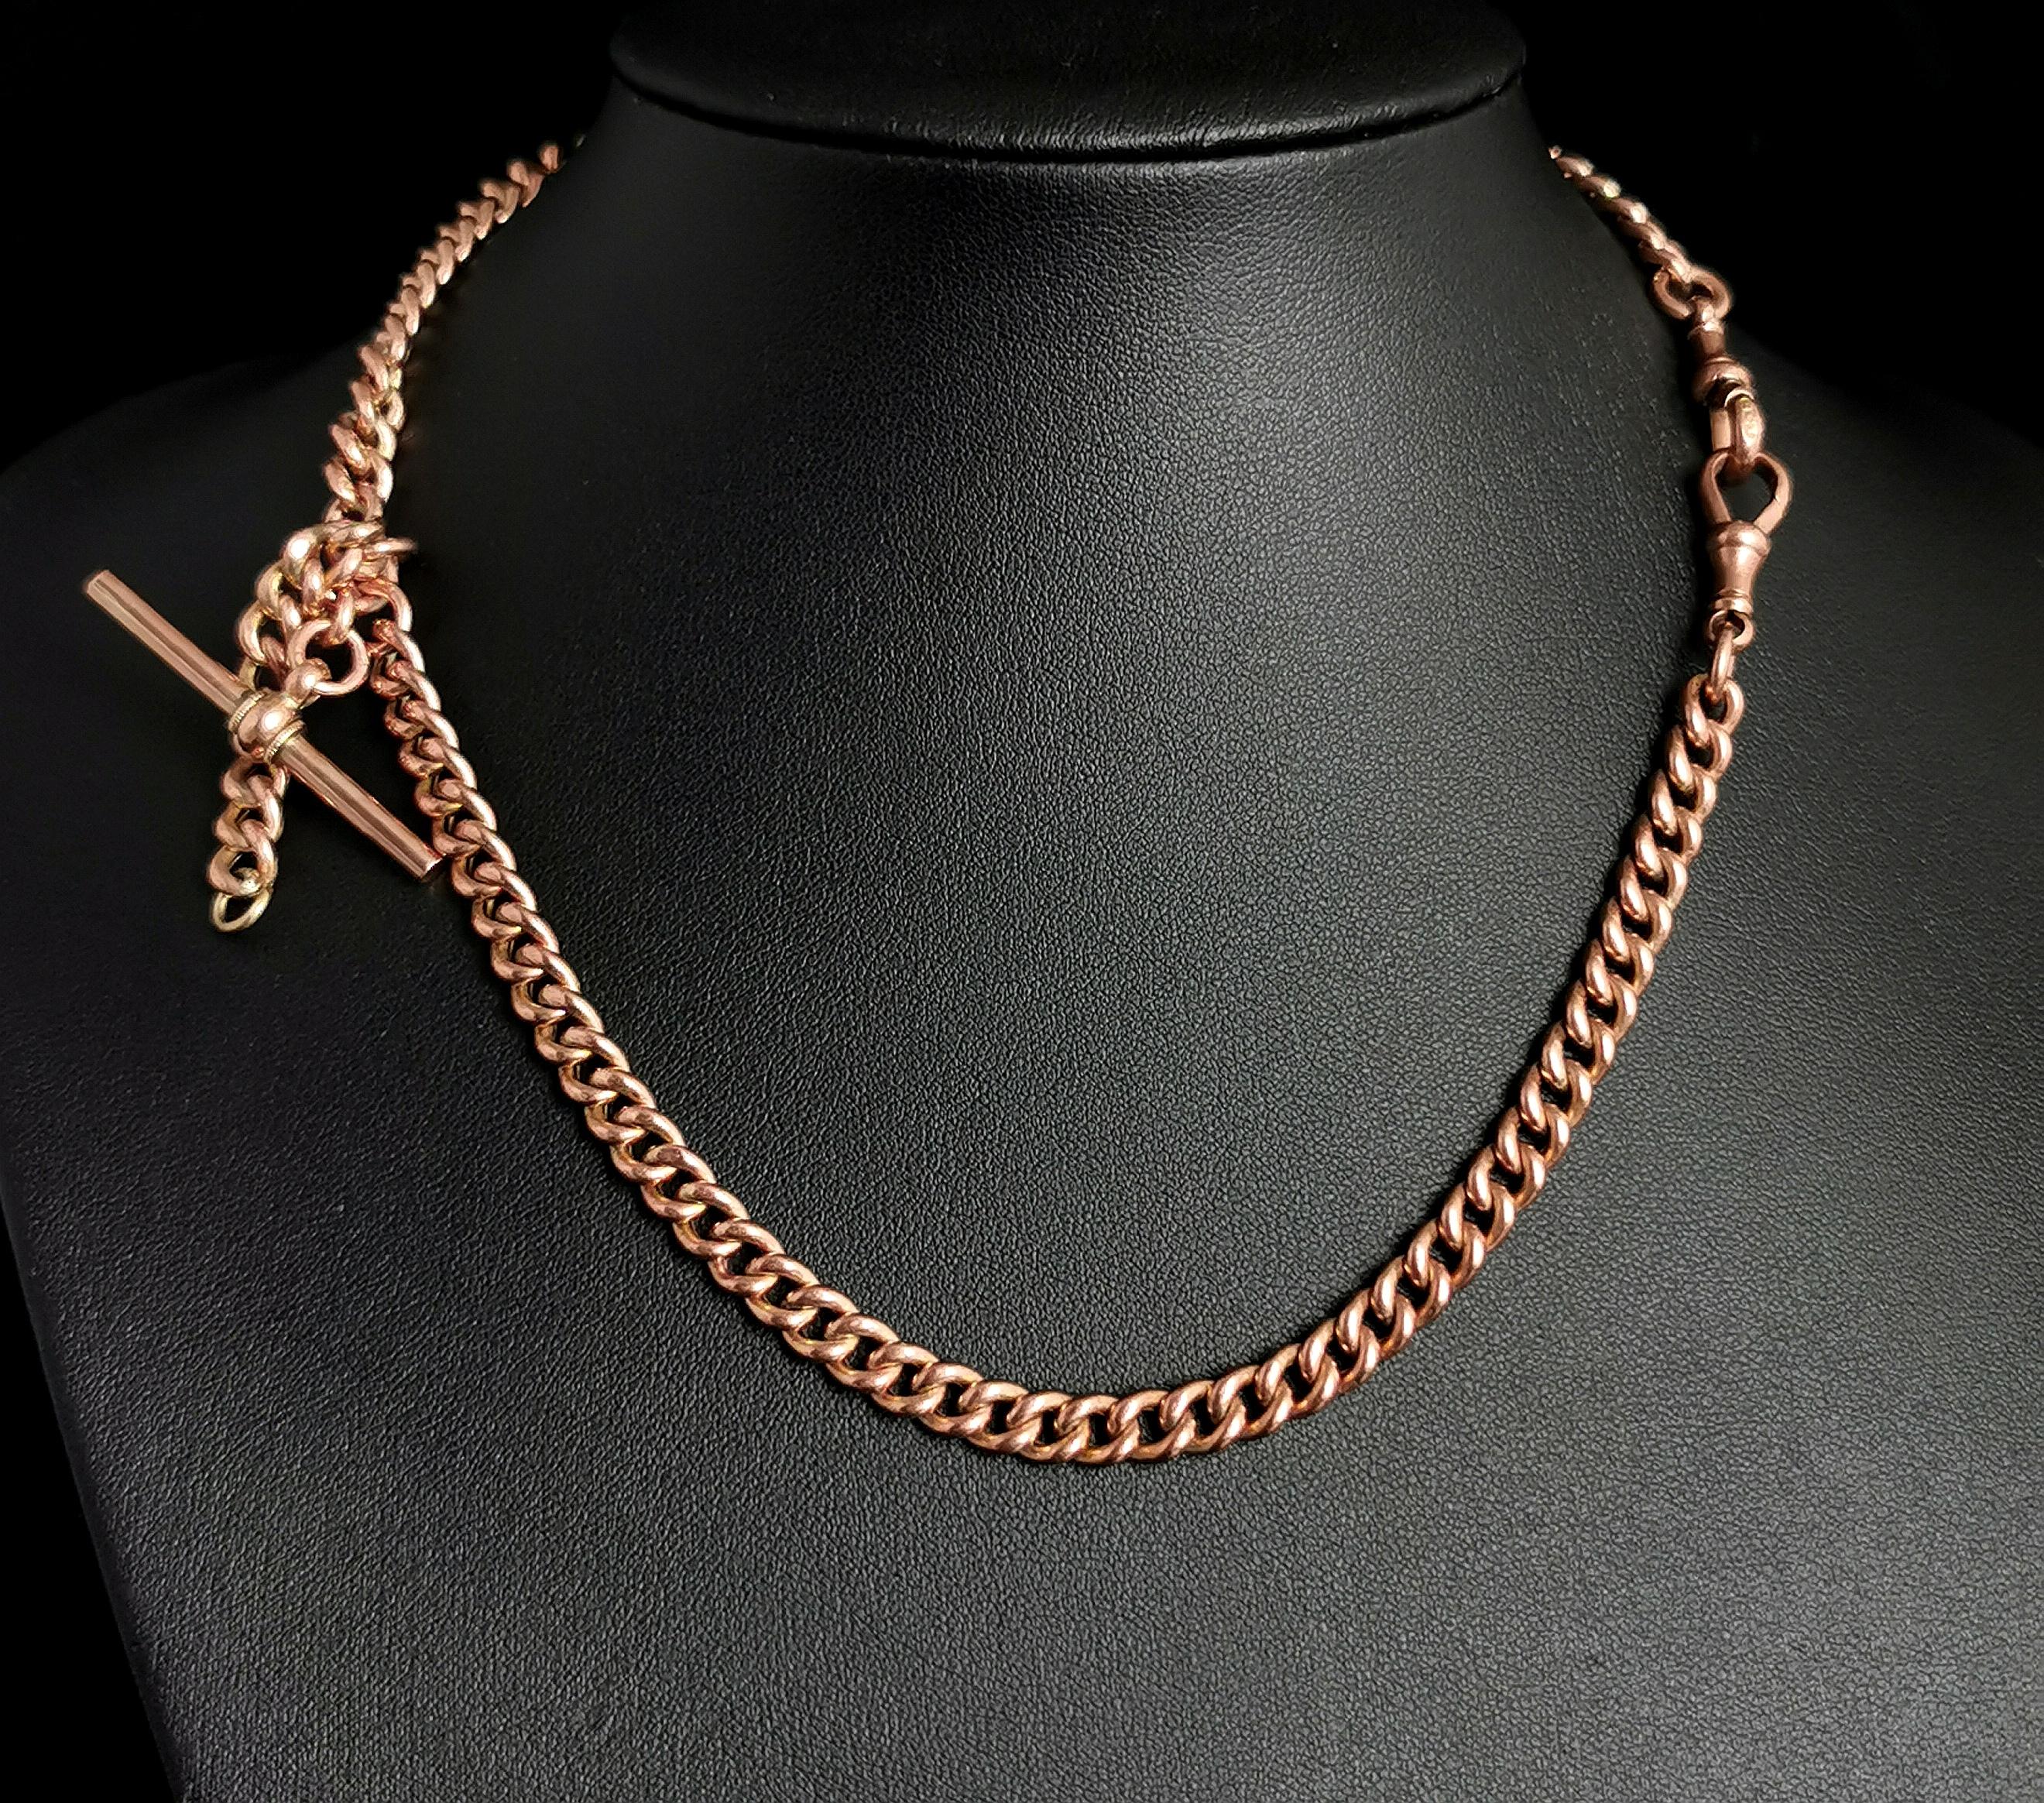 A handsome antique, Edwardian era 9ct Rose gold Albert chain.

It is a double Albert chain lightly graduating in width with a short extension chain near the t bar for adding a fob or pendant.

It has gorgeous chunky, hollow curb links with a rich